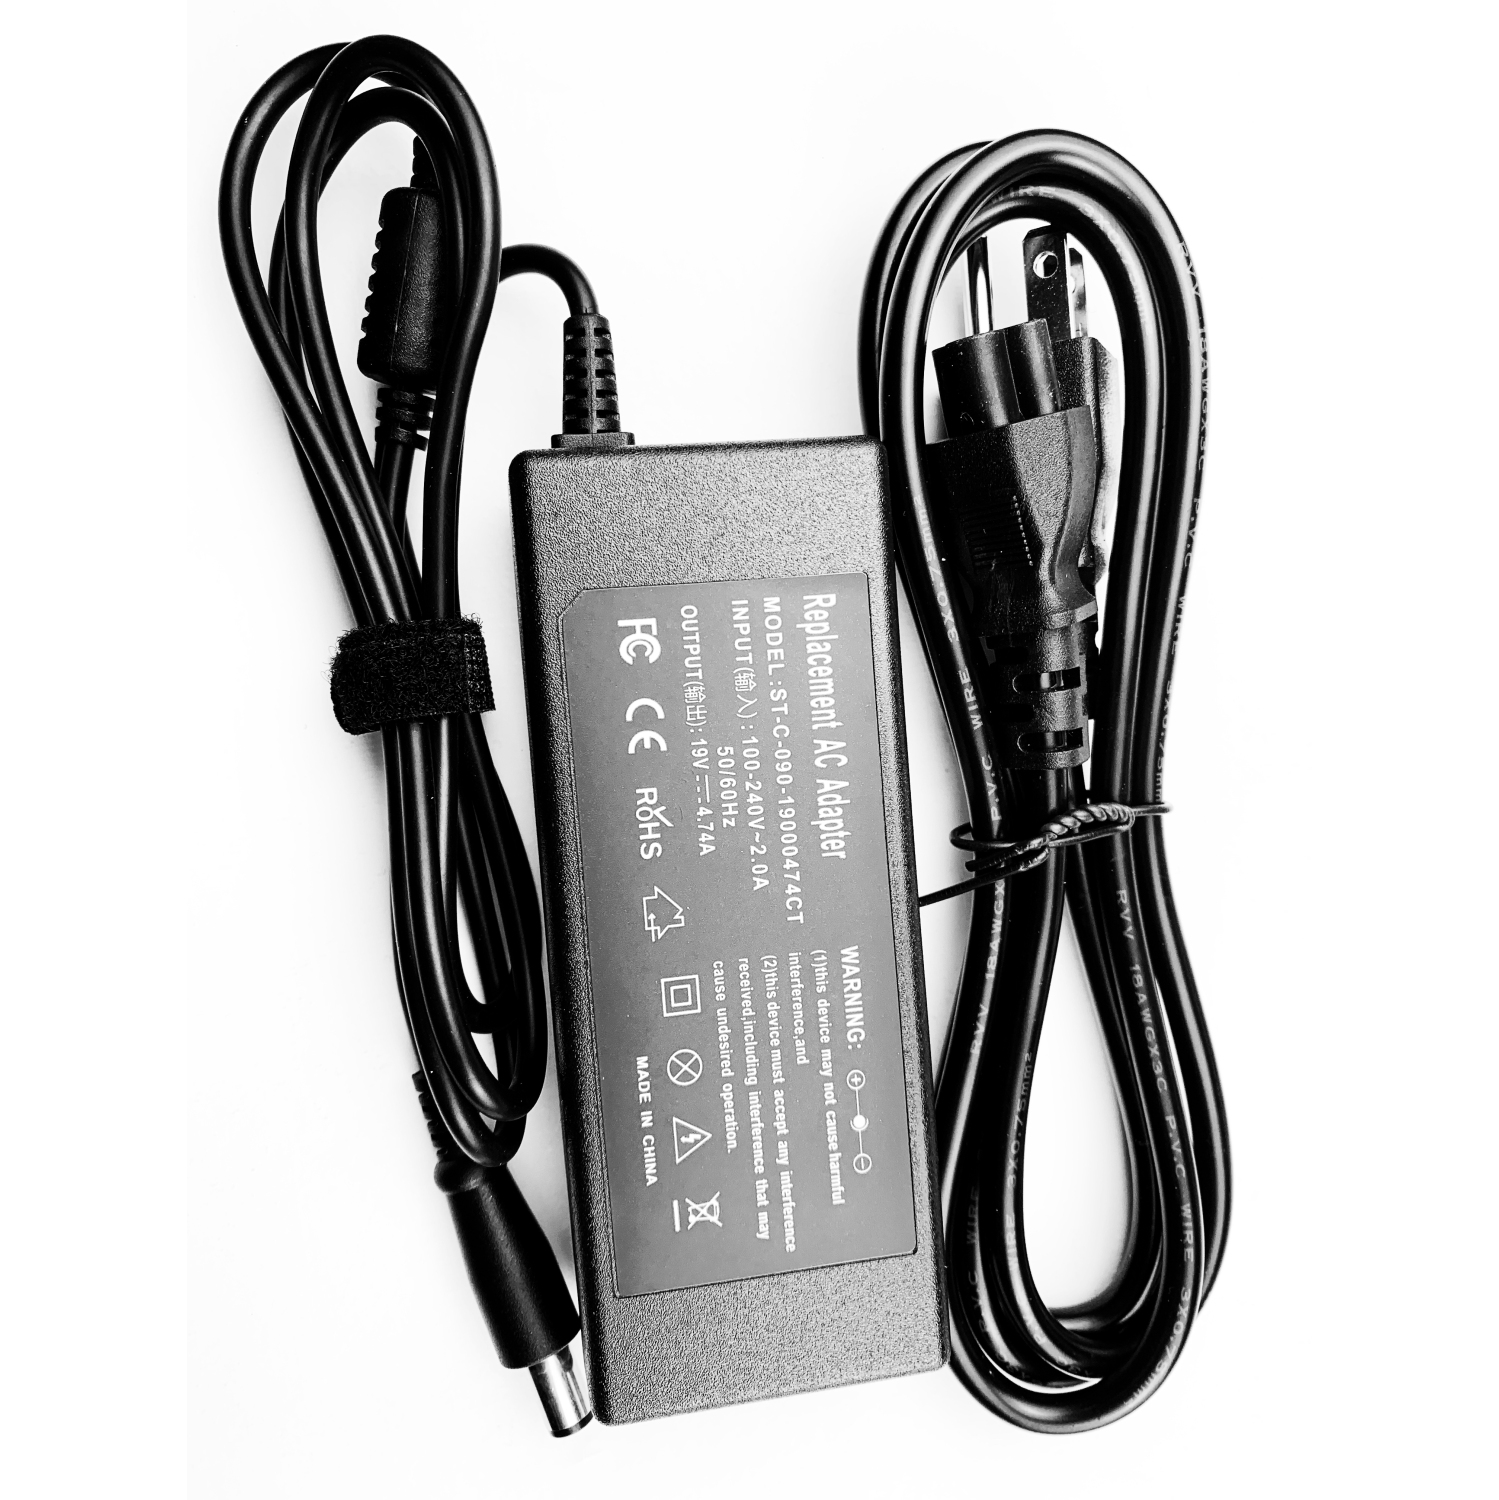 3.5A 65W AC adapter charger for HP Pavilion DV5-5200 DV6 Probook 430 G1 440 G2 450 G2 NEW